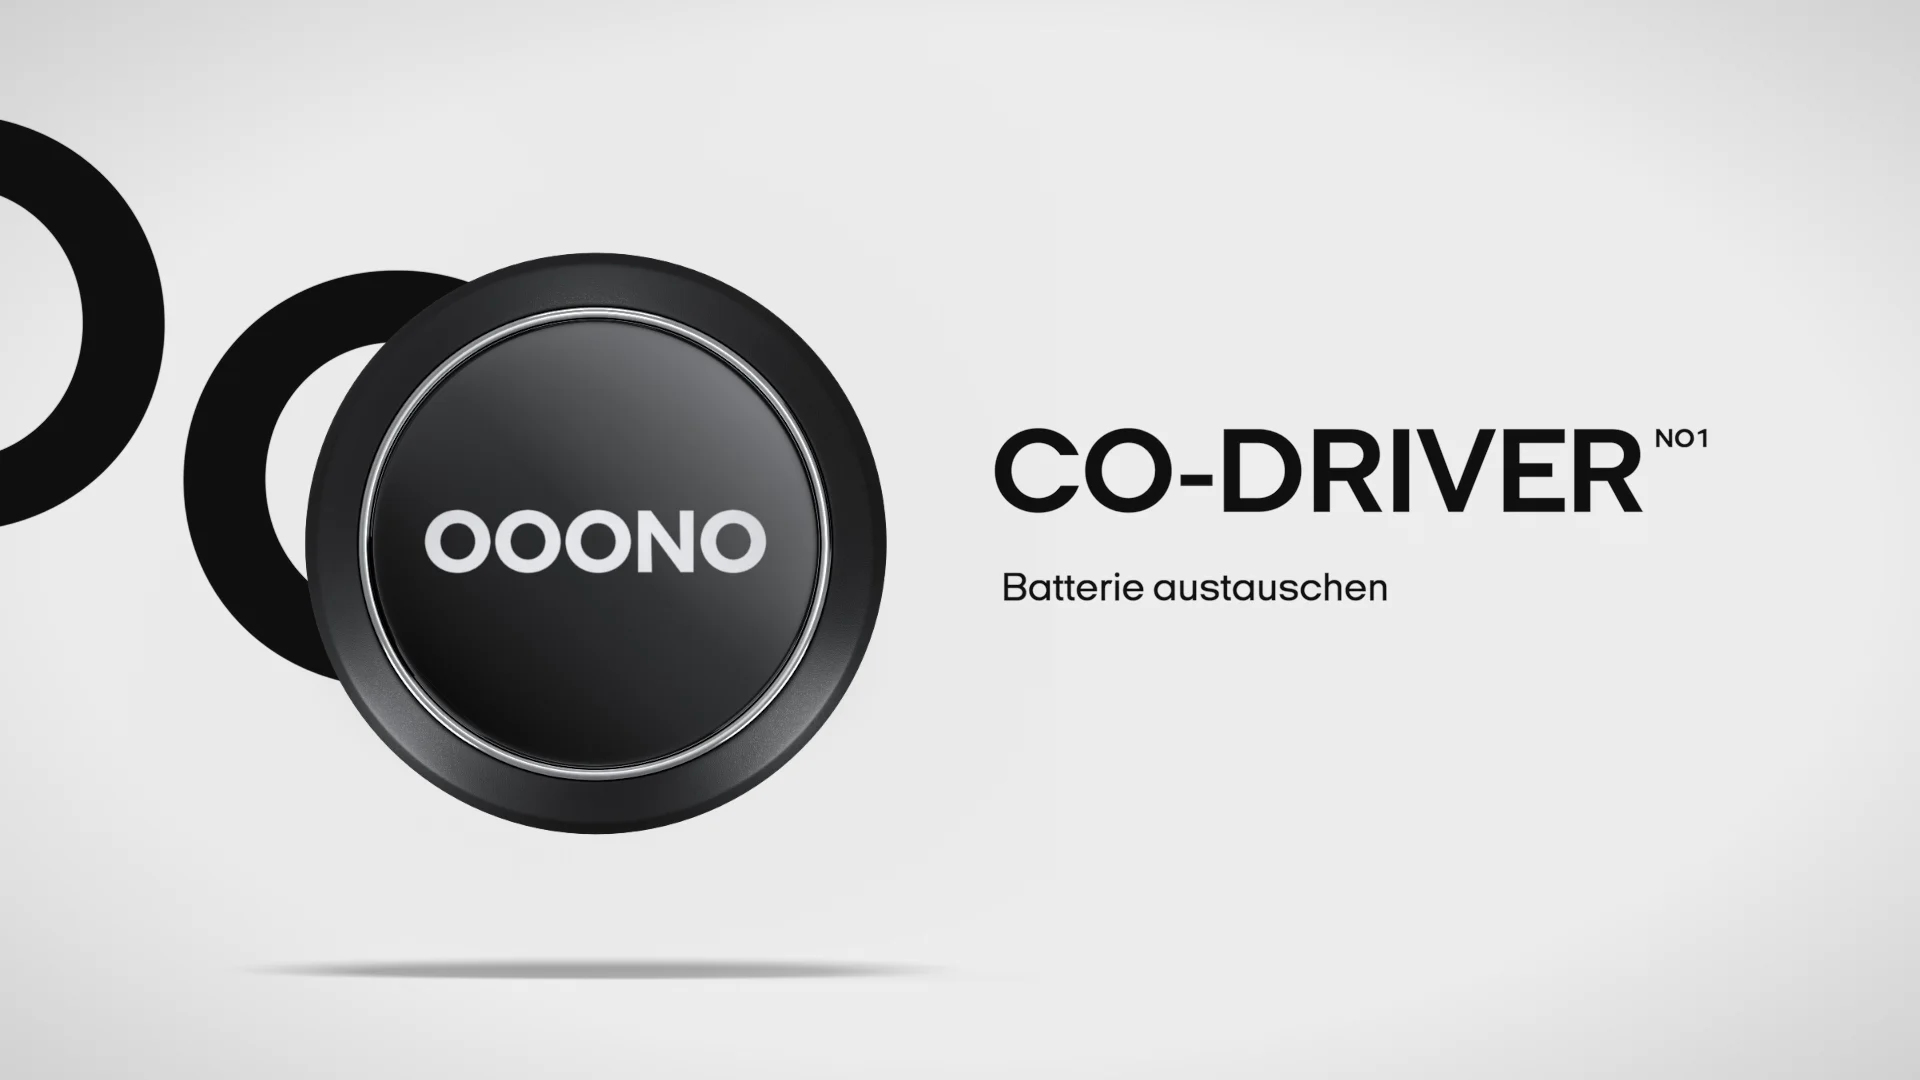 The battery in OOONO CO-DRIVER NO1 - German on Vimeo